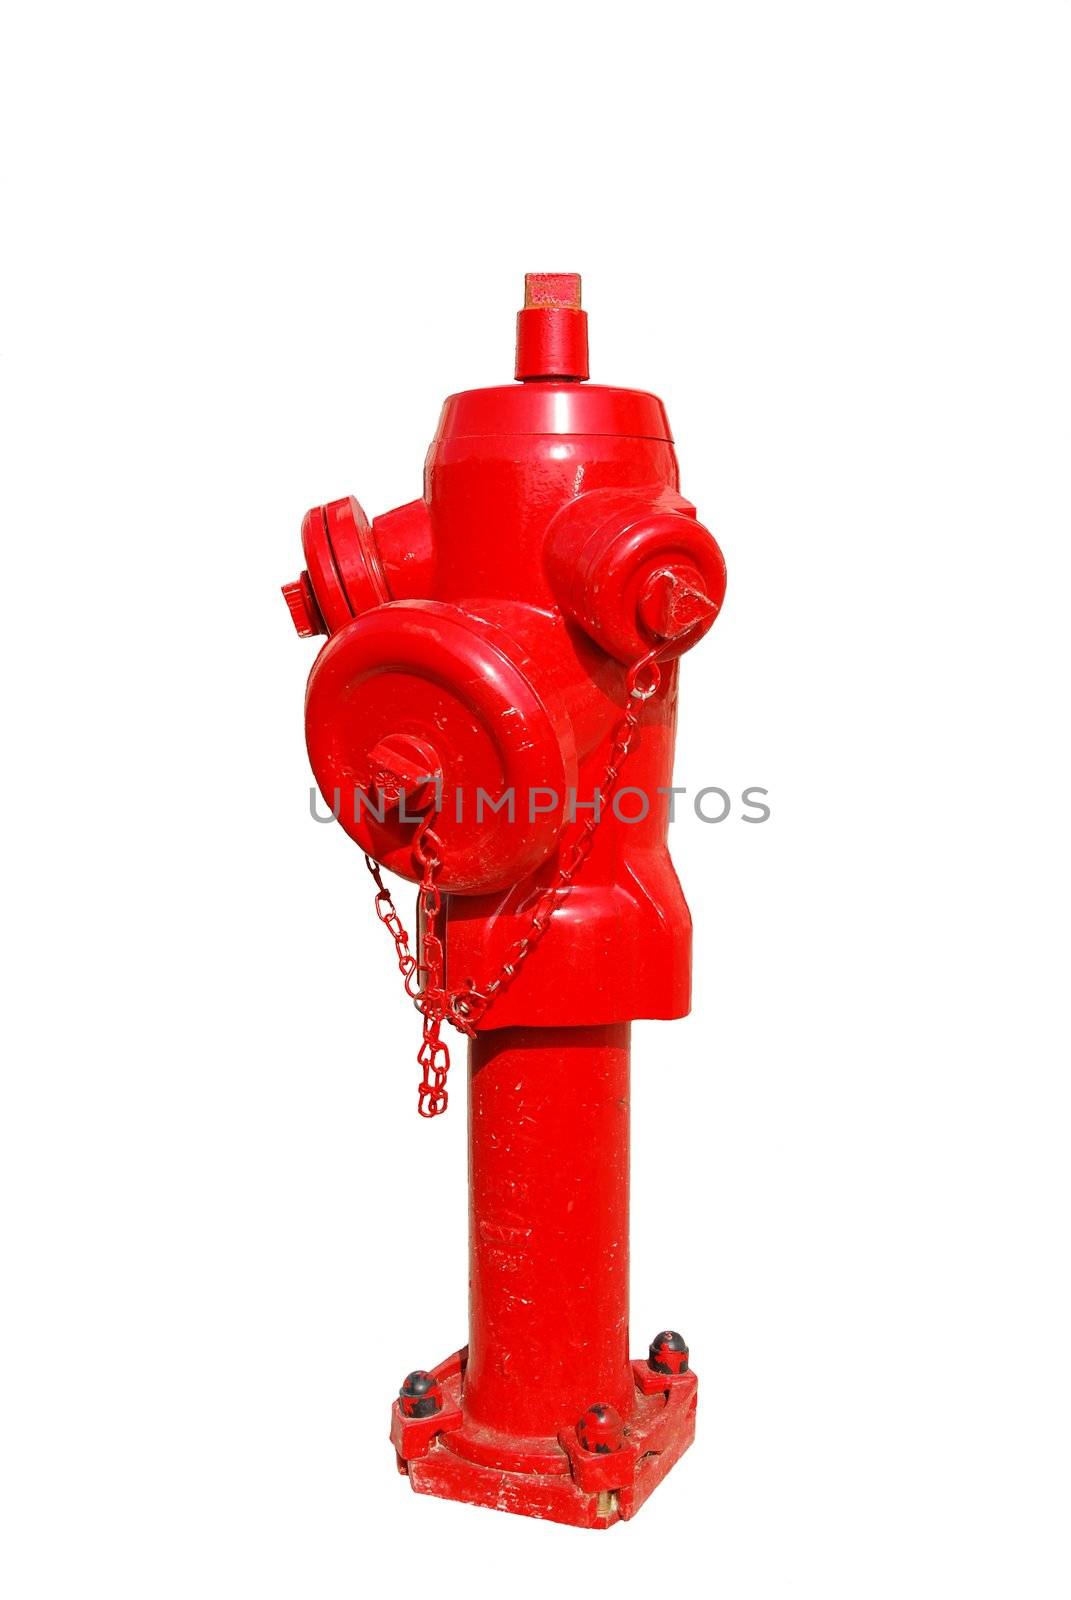 photo of a bright red fire hydrant over white